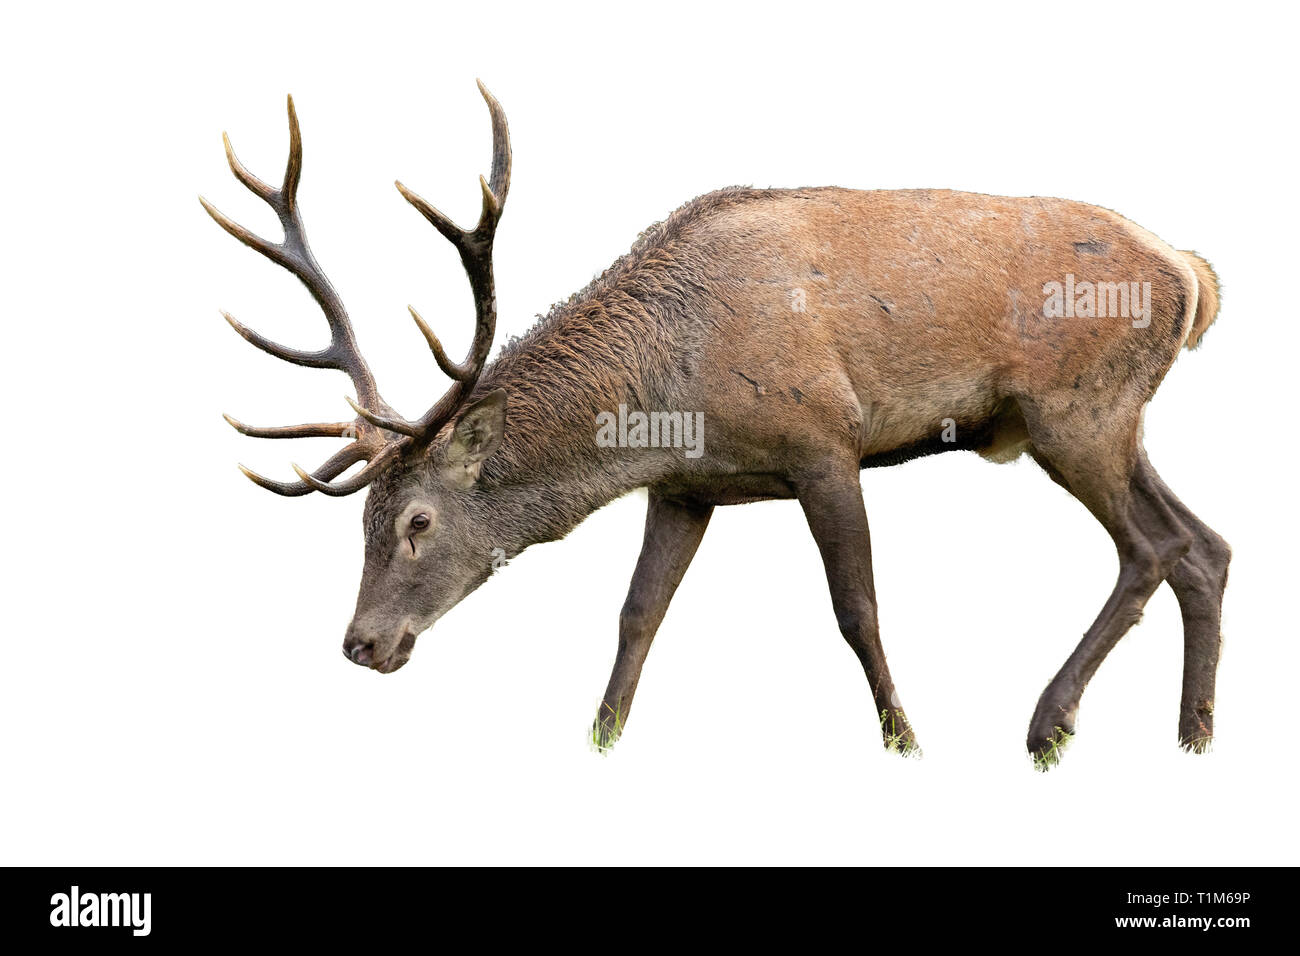 Isolated grazing red deer, cervus elaphus, stag with antlers. Mammal separated on white background with head bowed down. Stock Photo